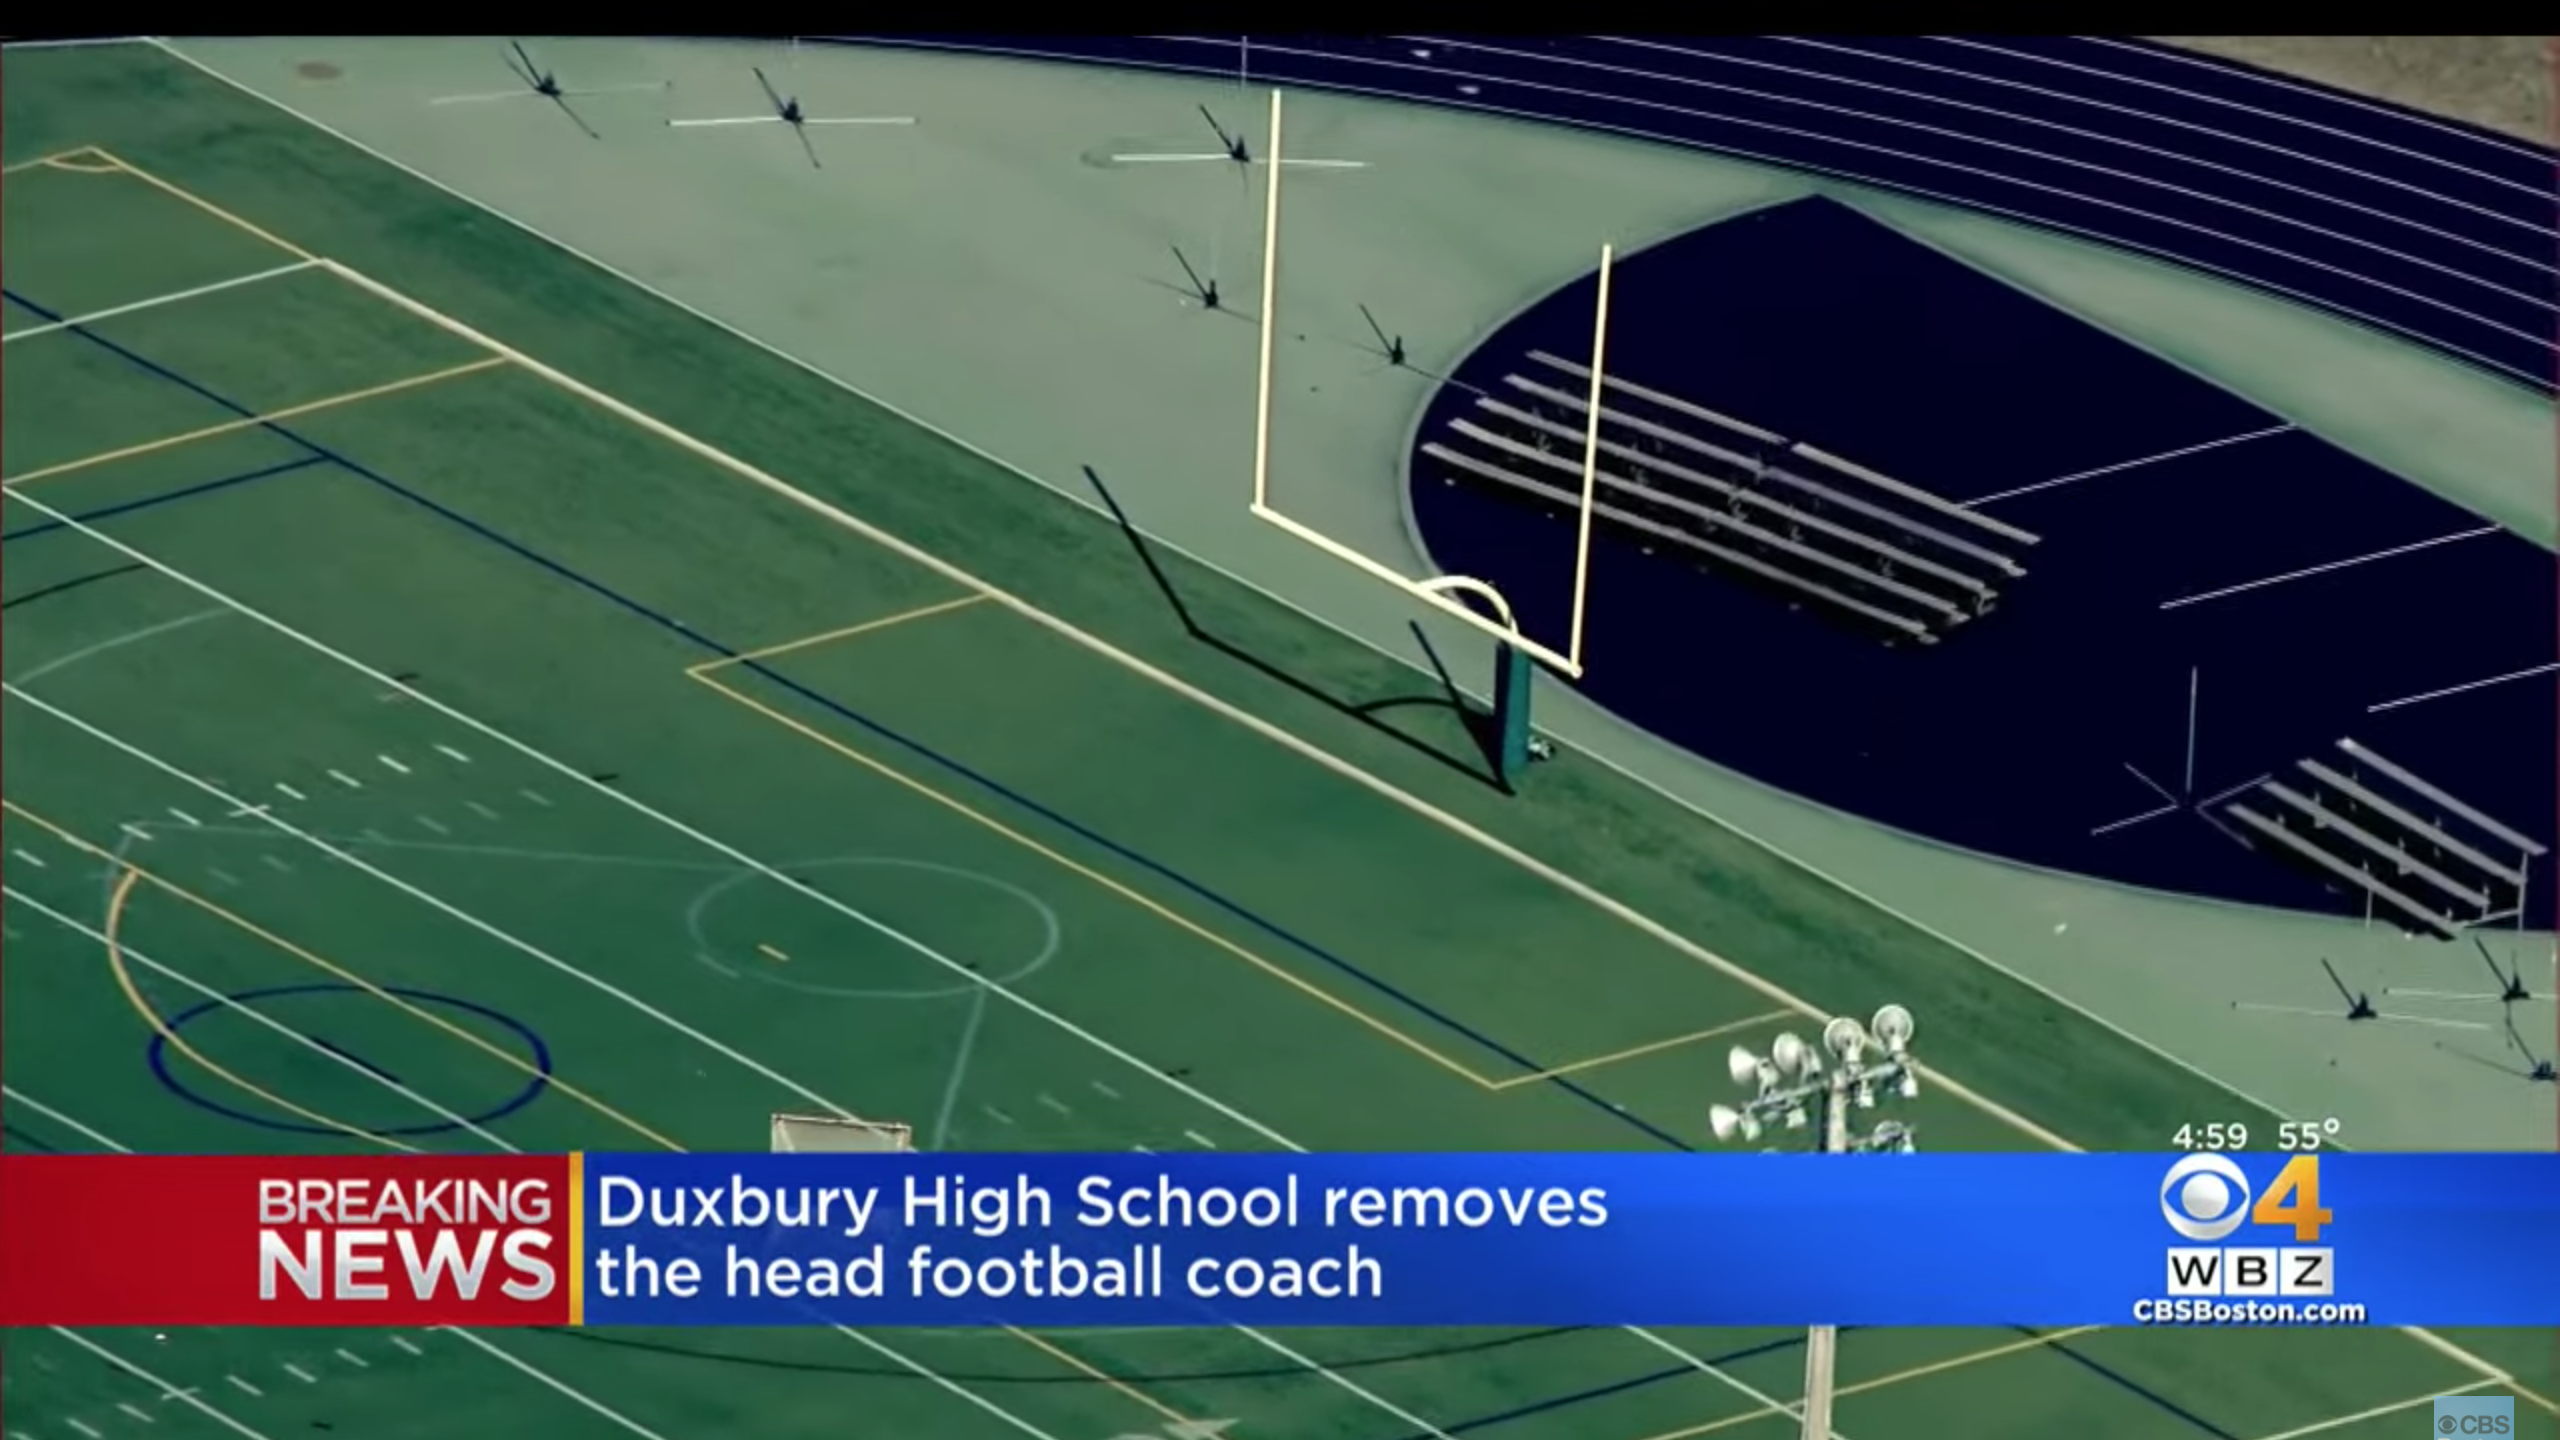 The football field at Duxbury High School. You can see the field, a track around it, and the goal posts. There's also a TV graphic that says "Breaking News: Duxbury High School removes the head football coach."